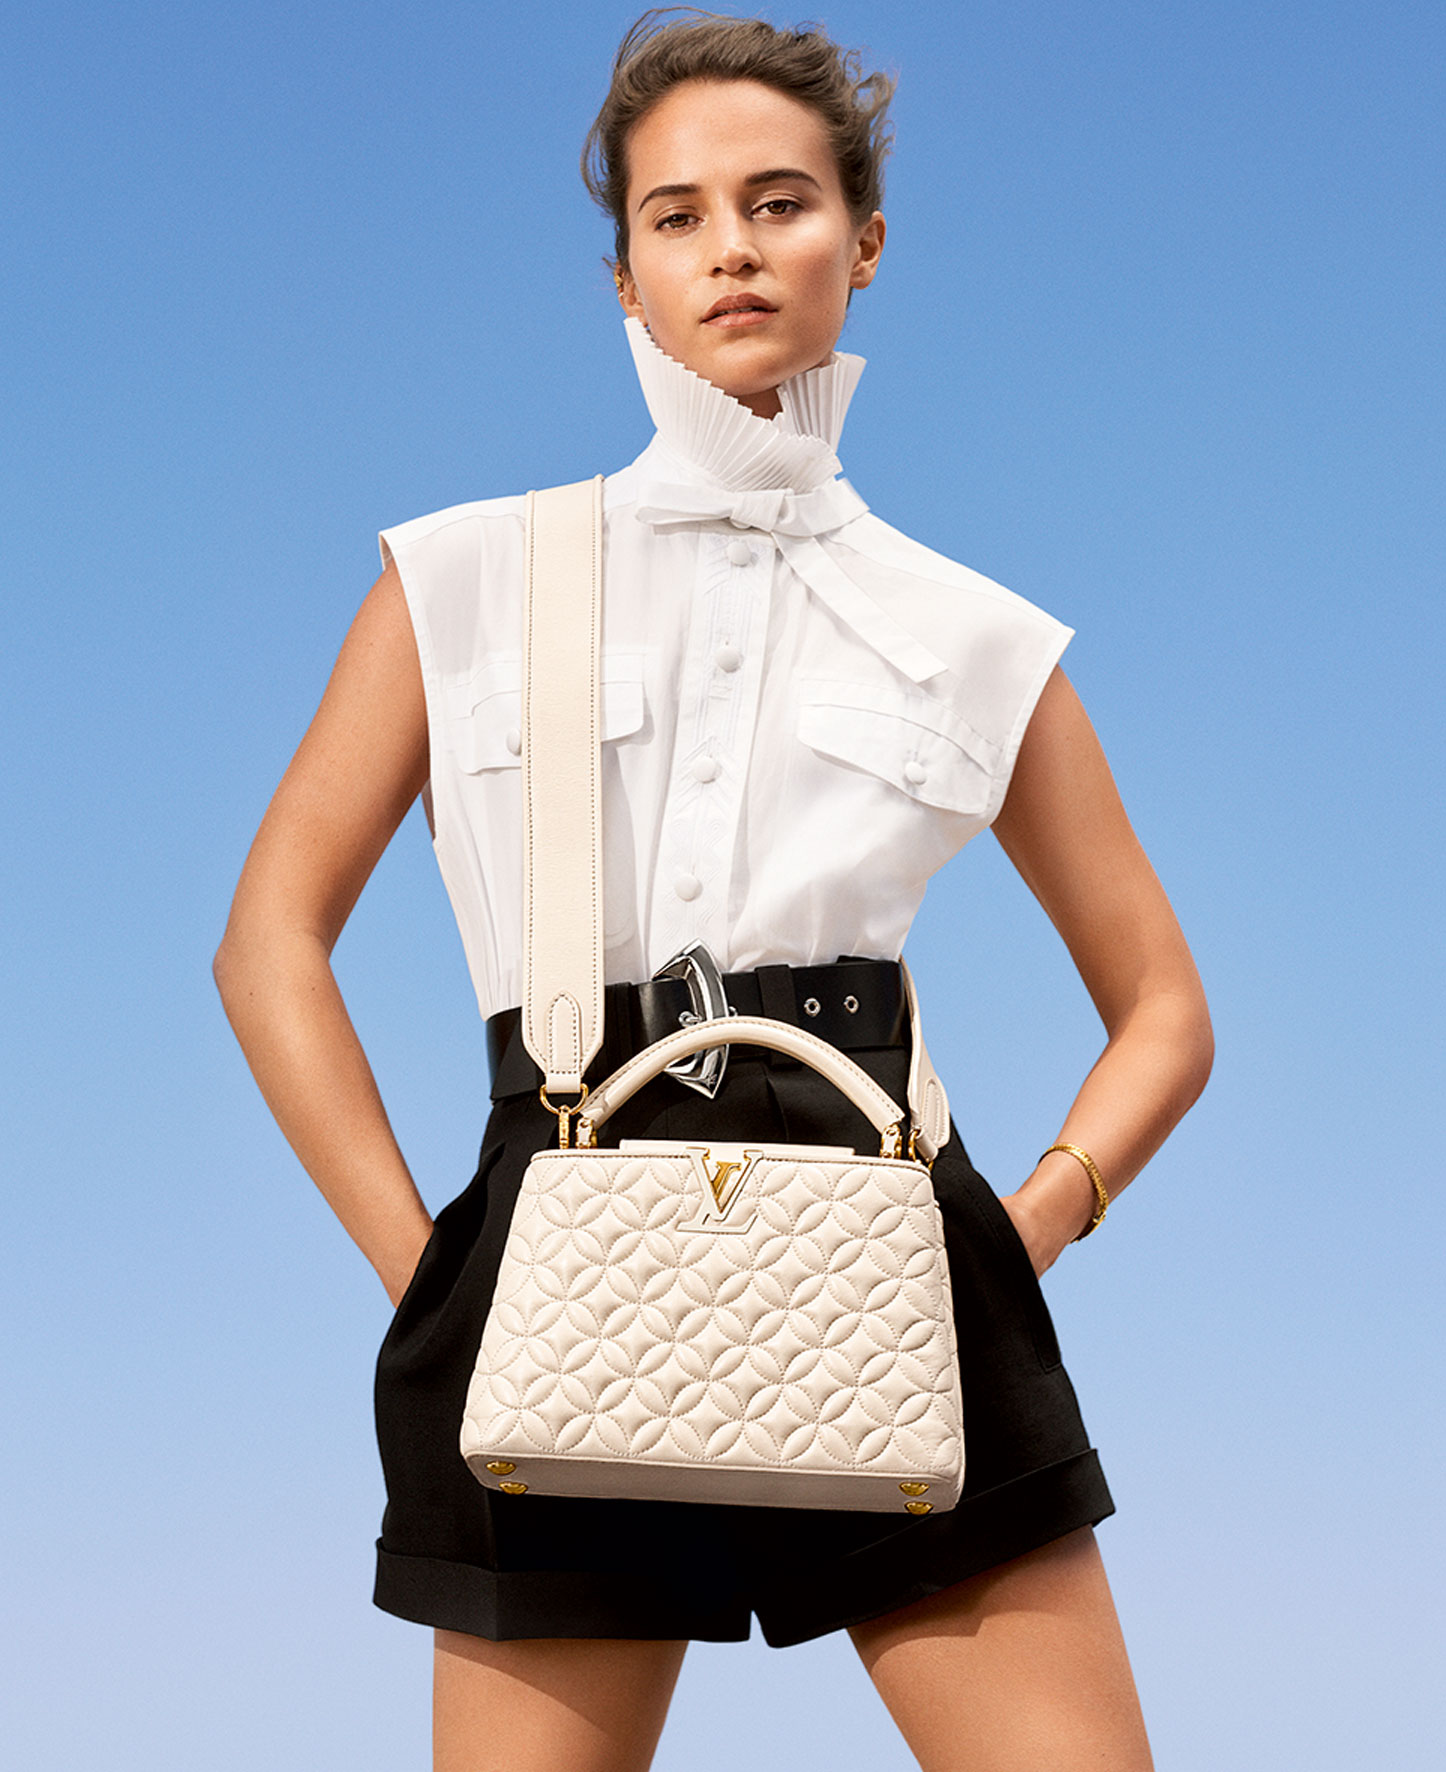 Louis Vuitton, exceptional ready-to-wear - Fashion & Leather Goods